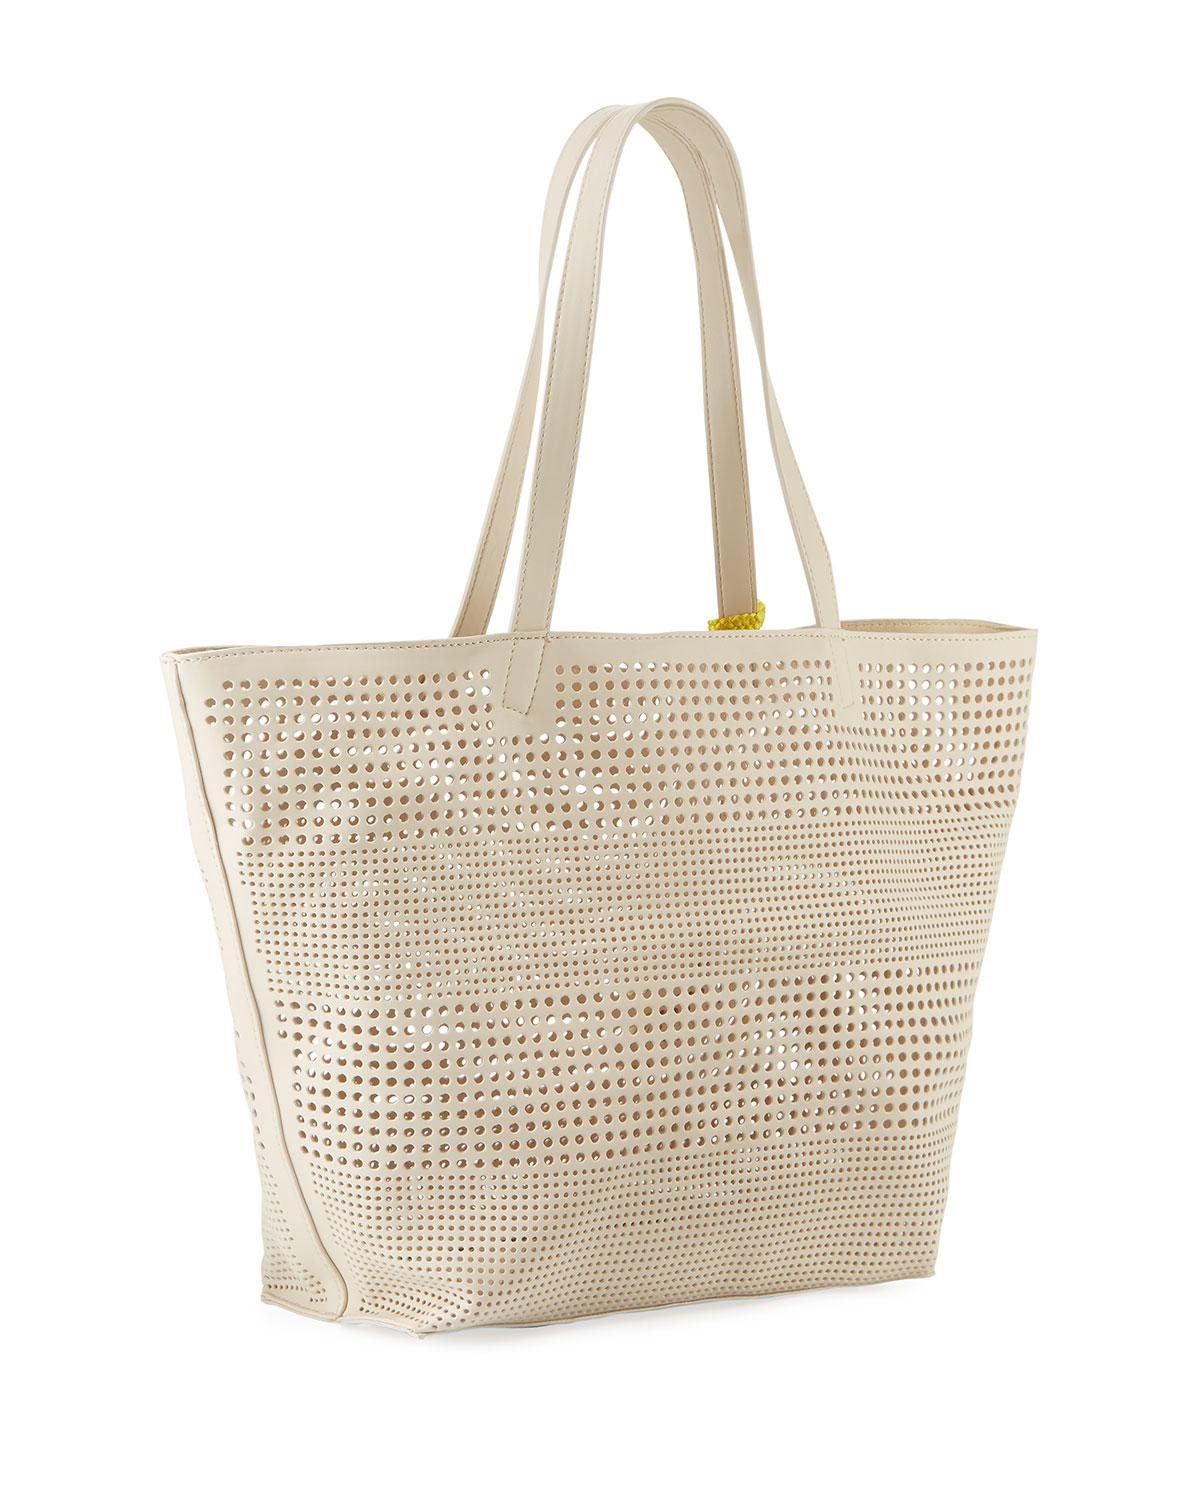 Lyst - Neiman Marcus Perforated Shoulder Tote Bag With Tassel